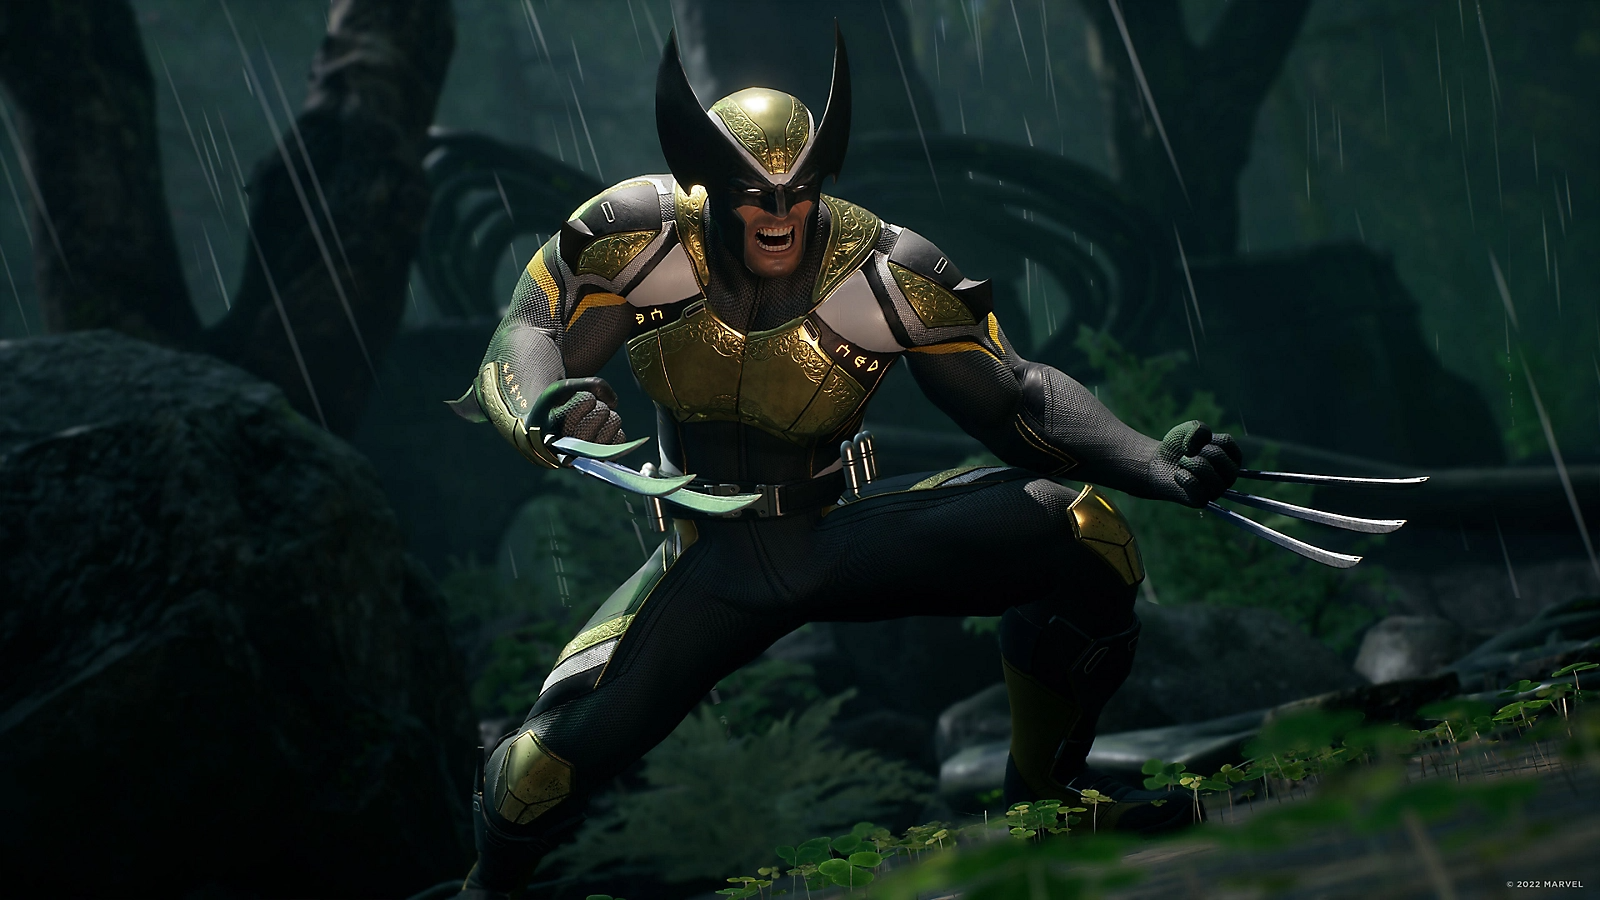 Marvel character Wolverine screaming in the rain, which is very relatable